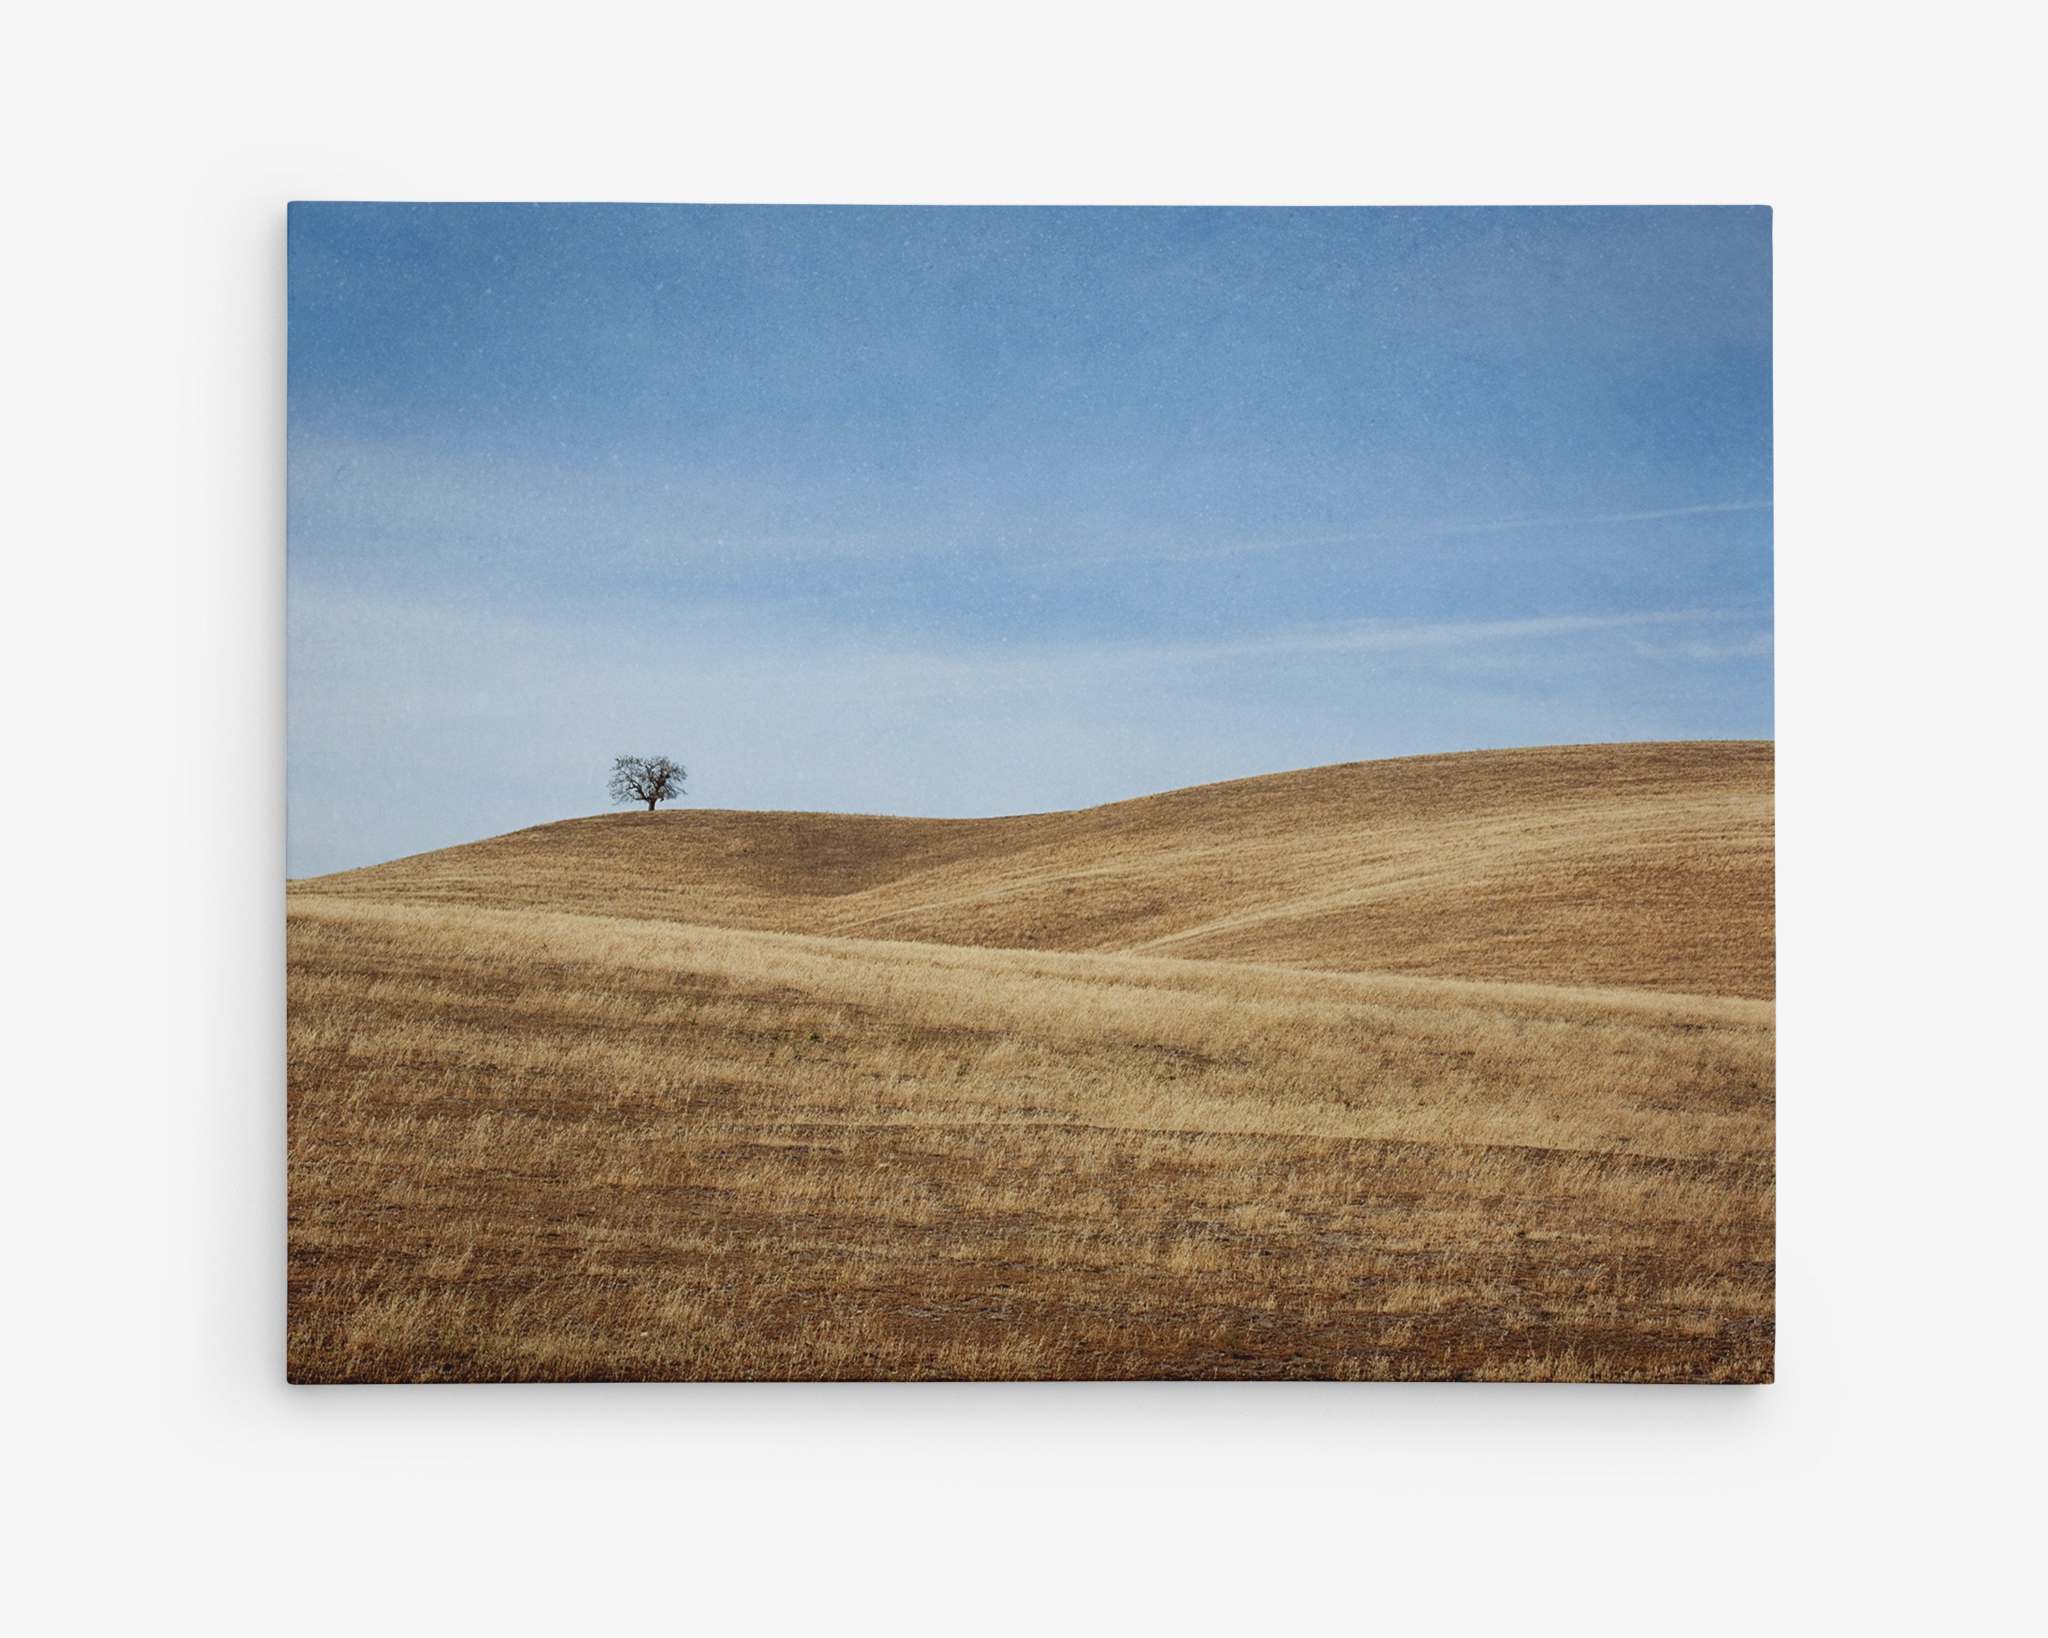 A landscape image depicting rolling golden hills under a clear blue sky. A solitary tree stands on one of the hills, adding a focal point to the serene, open expanse. Printed on premium artist-grade canvas, this ready-to-hang solution highlights the natural beauty and tranquility of the scene. This is California Central Coast Landscape Canvas Wall Decor 'Golden Ynez' by Offley Green.